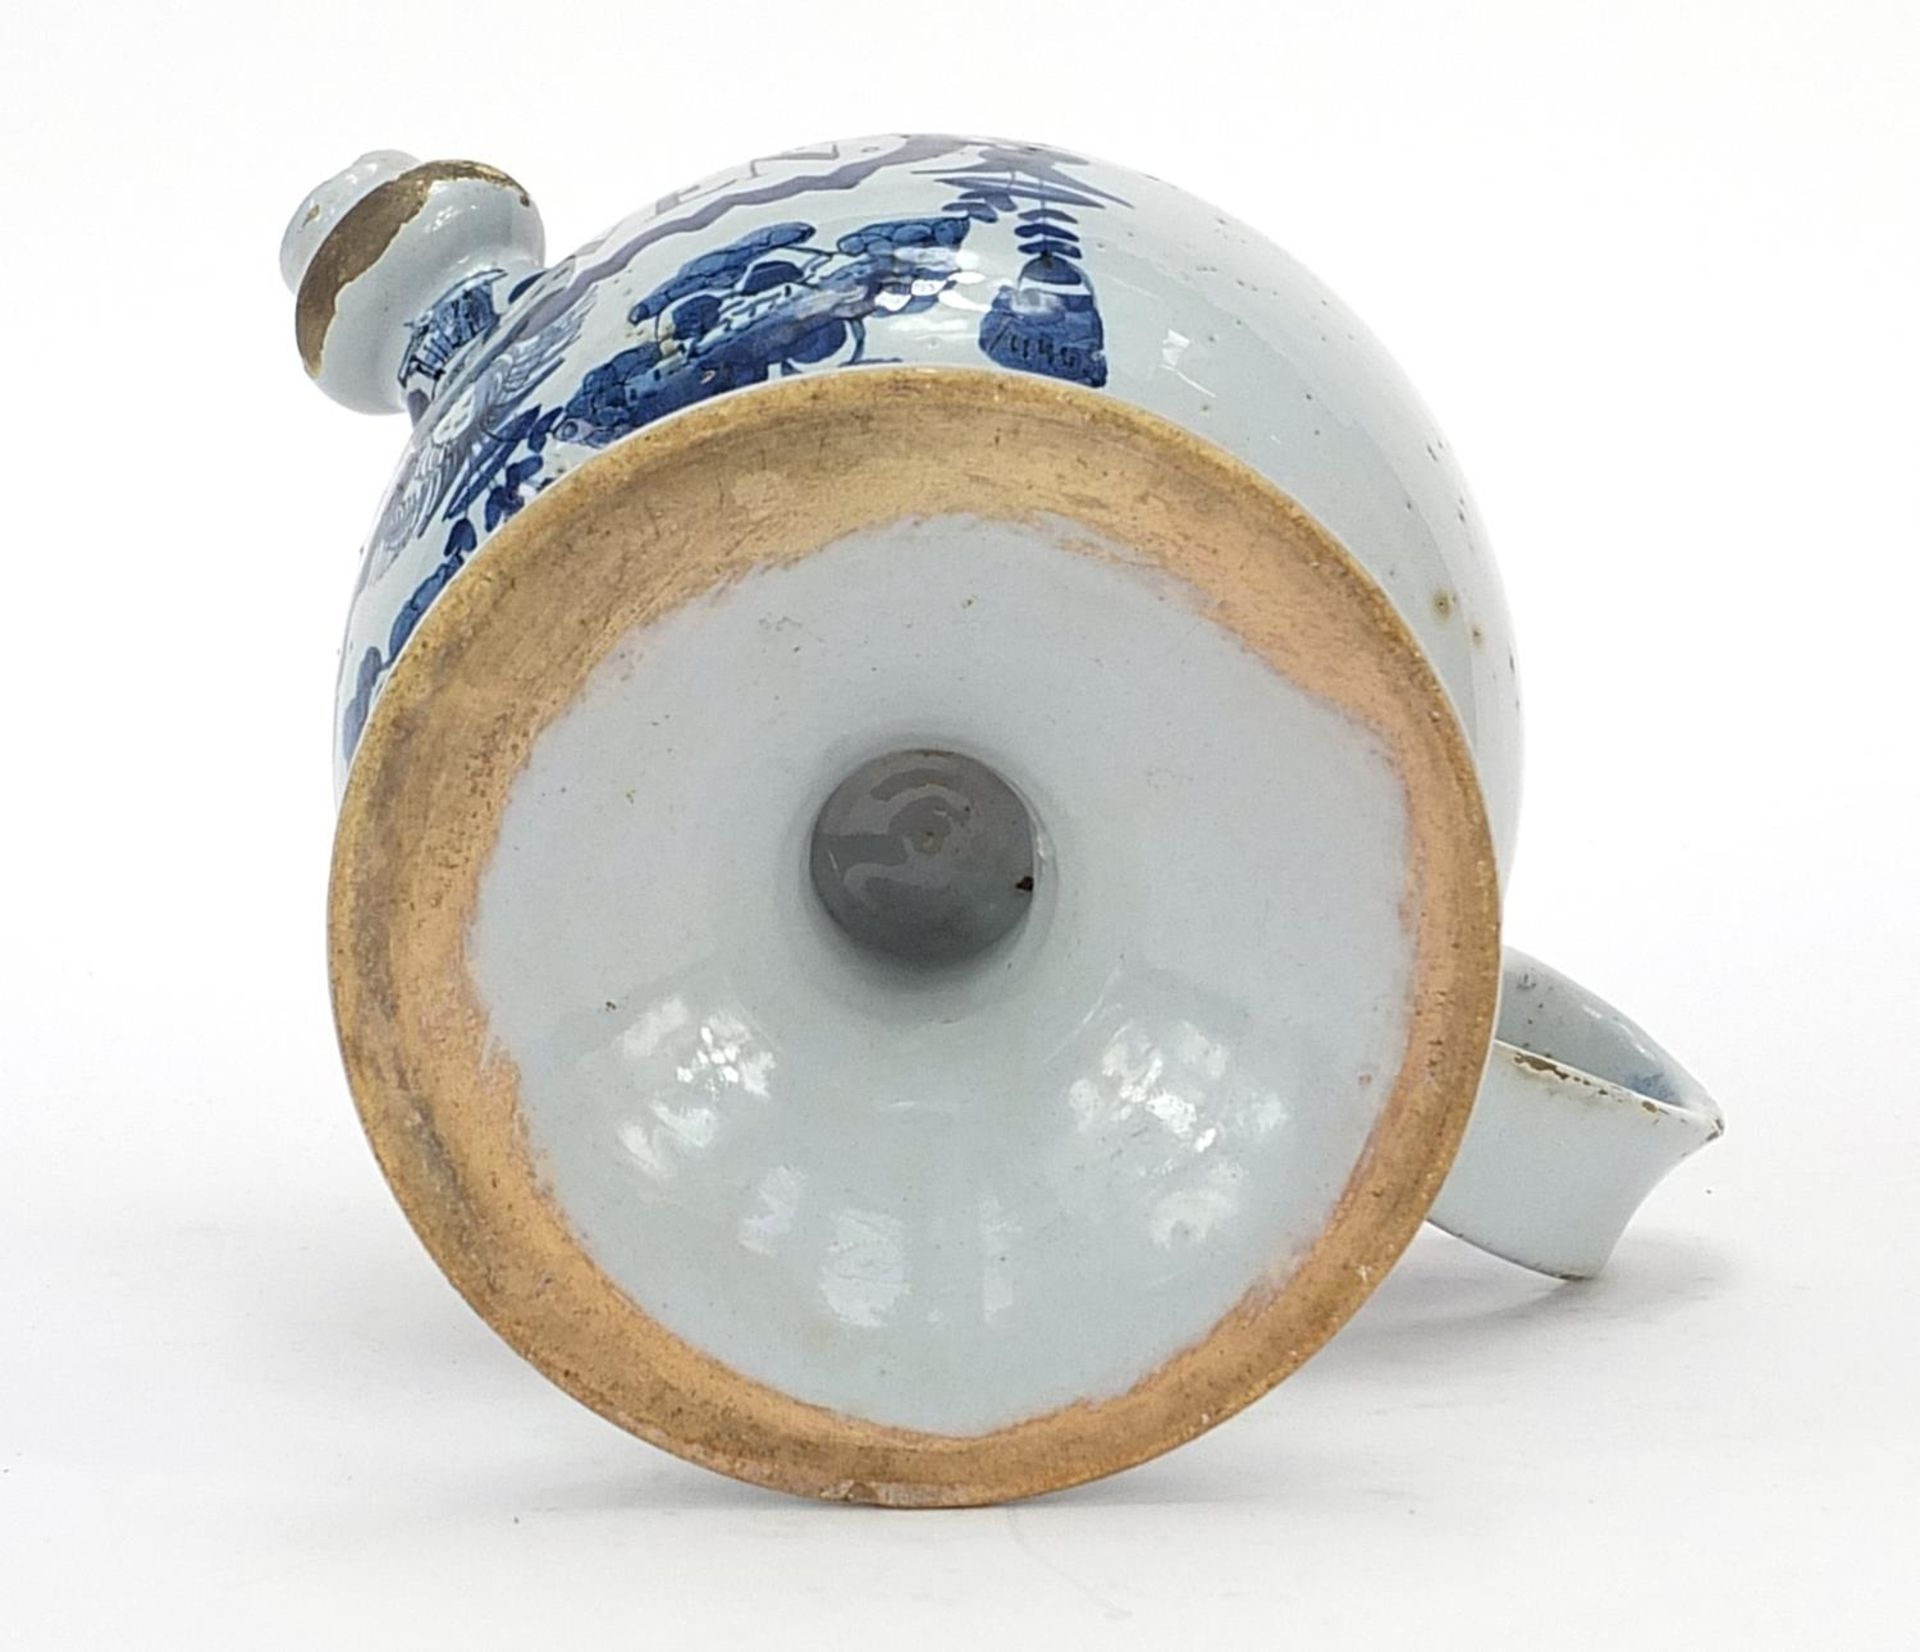 18th century Delft blue and white tin glazed drug jar with handle and spout, 18cm high - Image 4 of 4